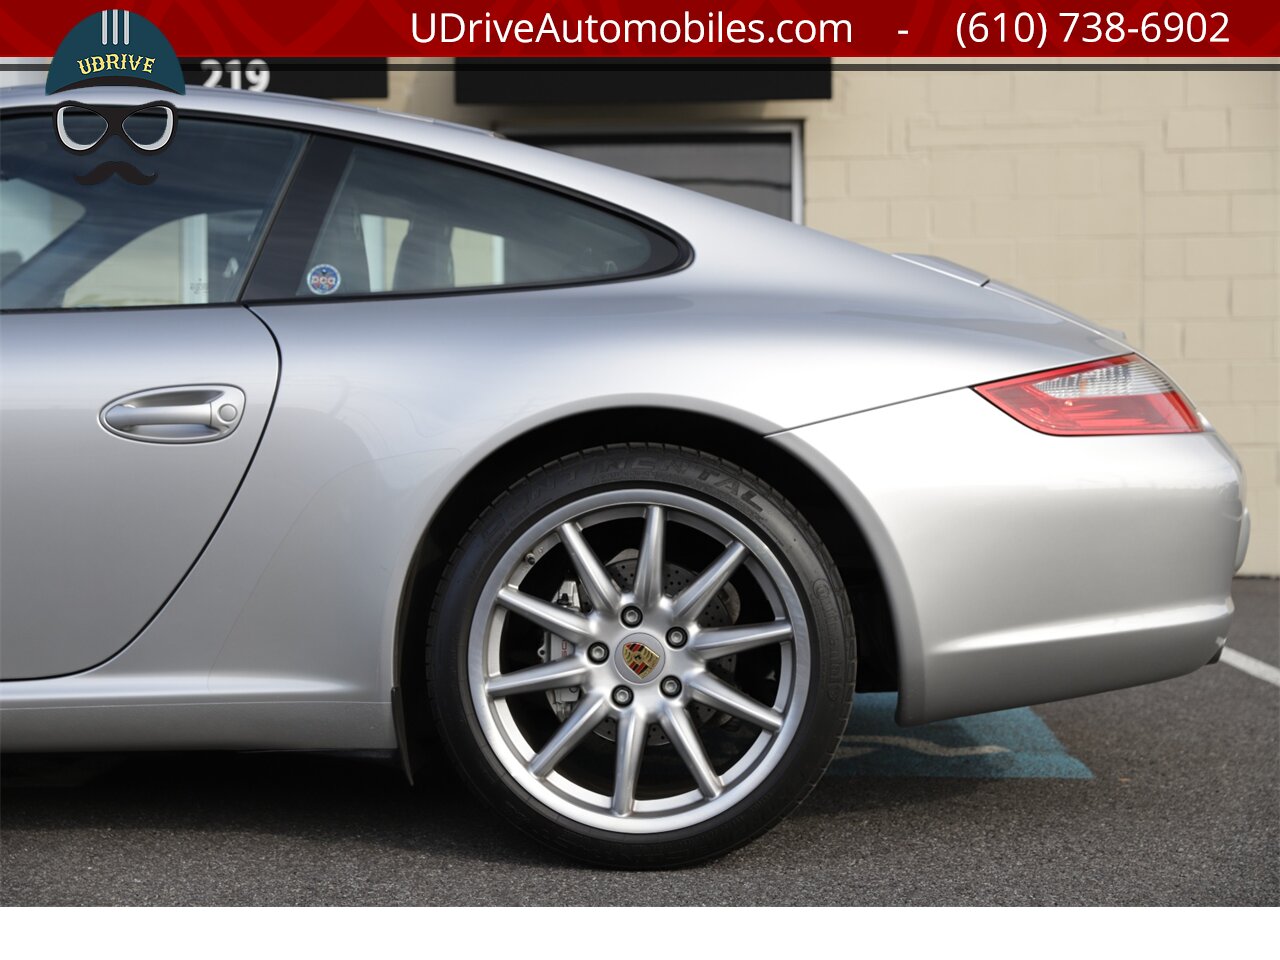 2006 Porsche 911 997 Carrera Coupe 6 Speed 19in Whls Immaculate   - Photo 23 - West Chester, PA 19382